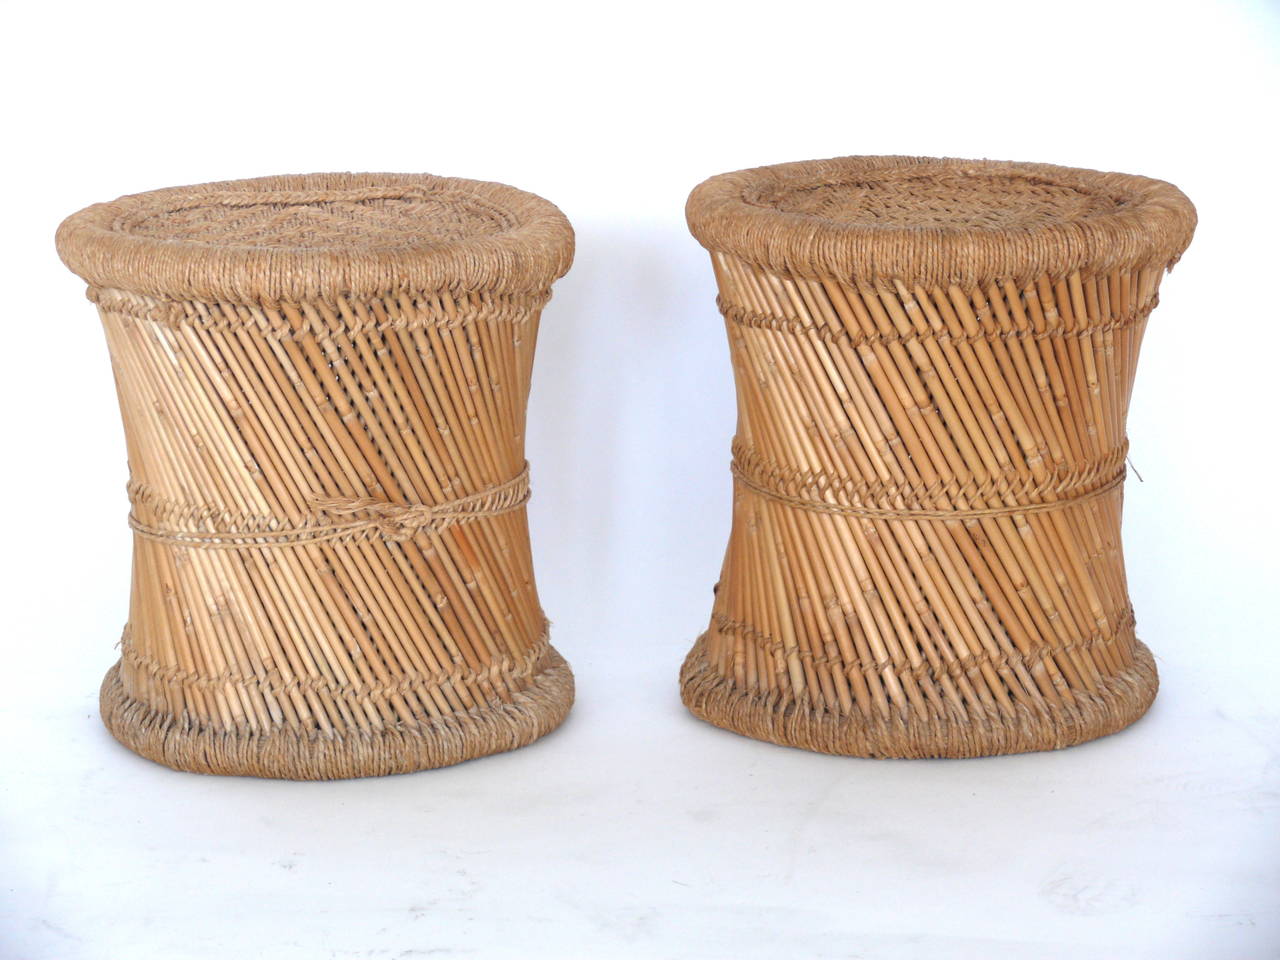 Fantastic pair of wicker and rattan end tables. Angled strands of wicker, with woven rattan and hemp at the top and bottom. Can also be used as stools. Very functional. Excellent vintage condition.